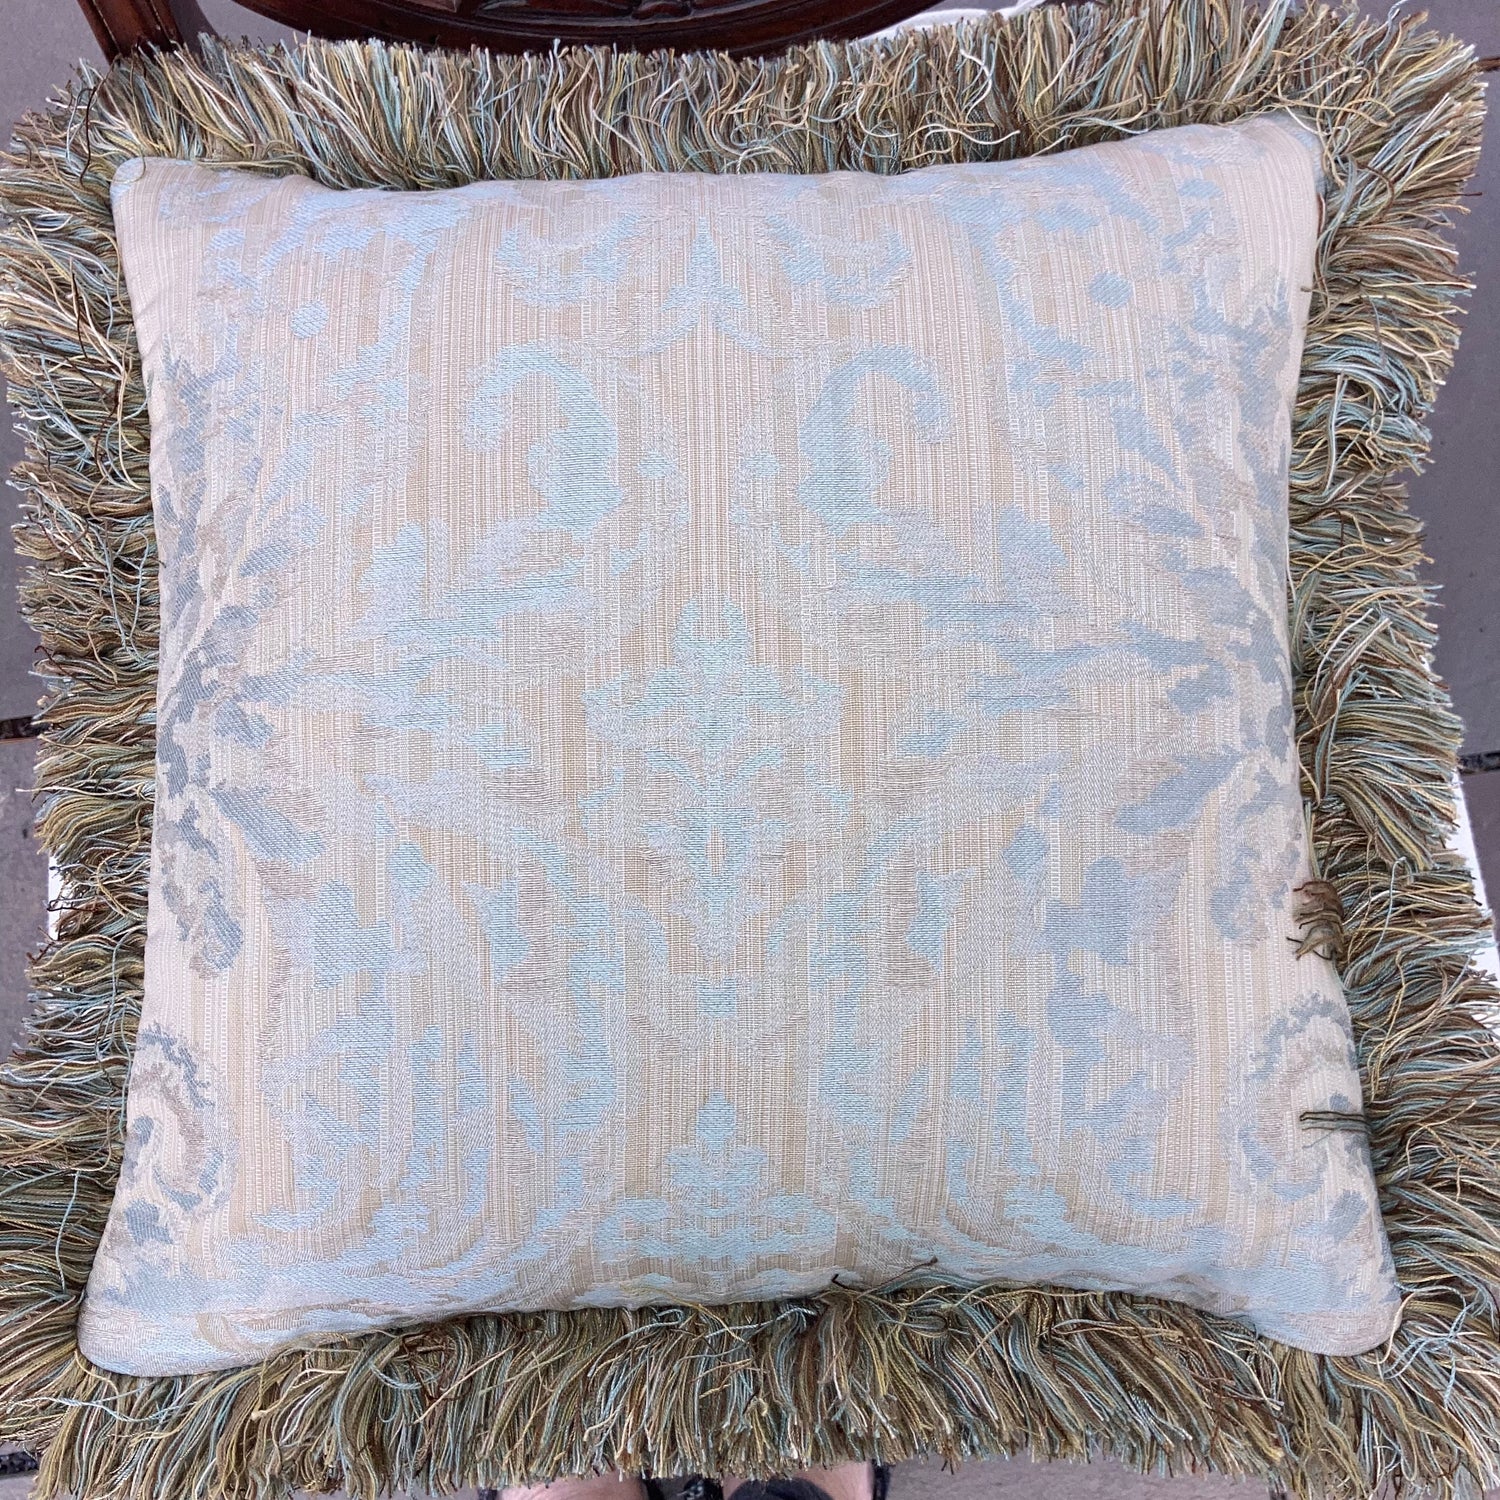 Vintage Italian Harlequin Damask  16 x 16  Square Designer Pillow with Down Feather Insert